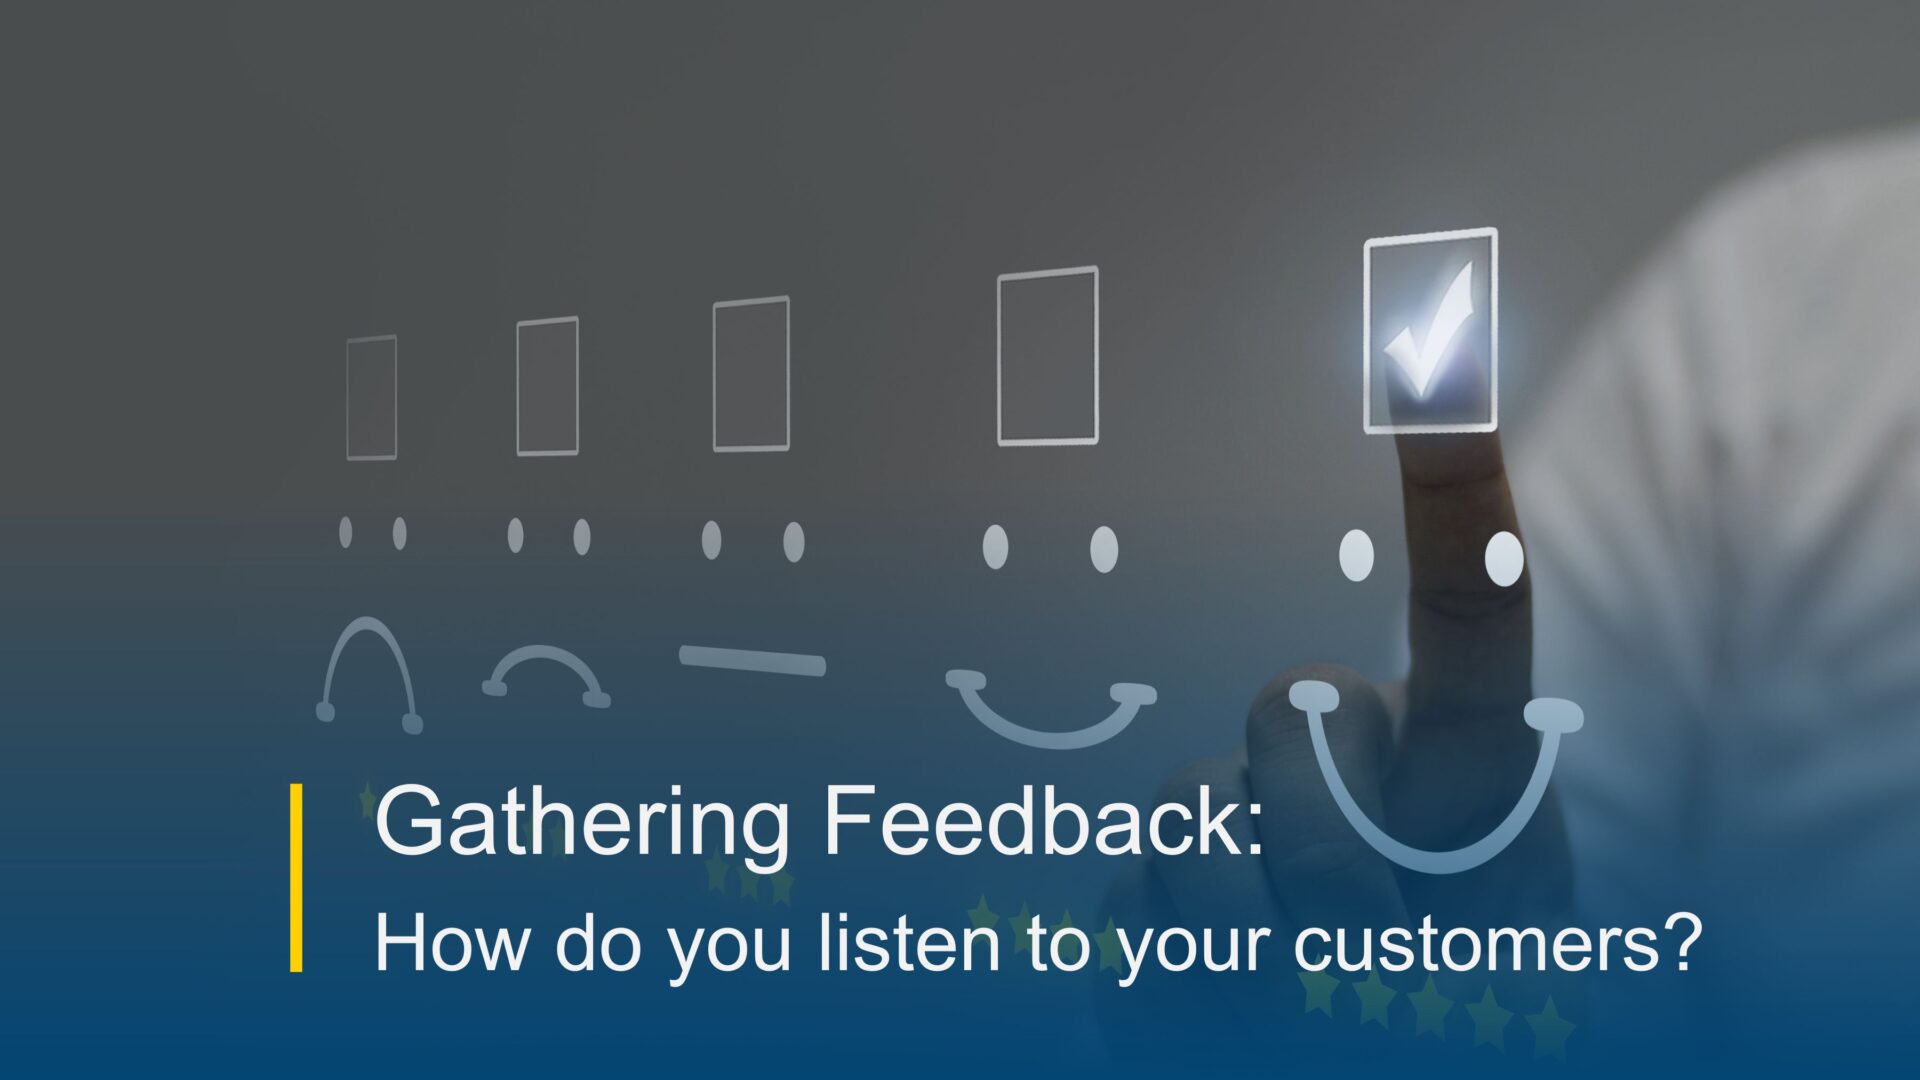 Gathering Feedback: How do you listen to your customers?